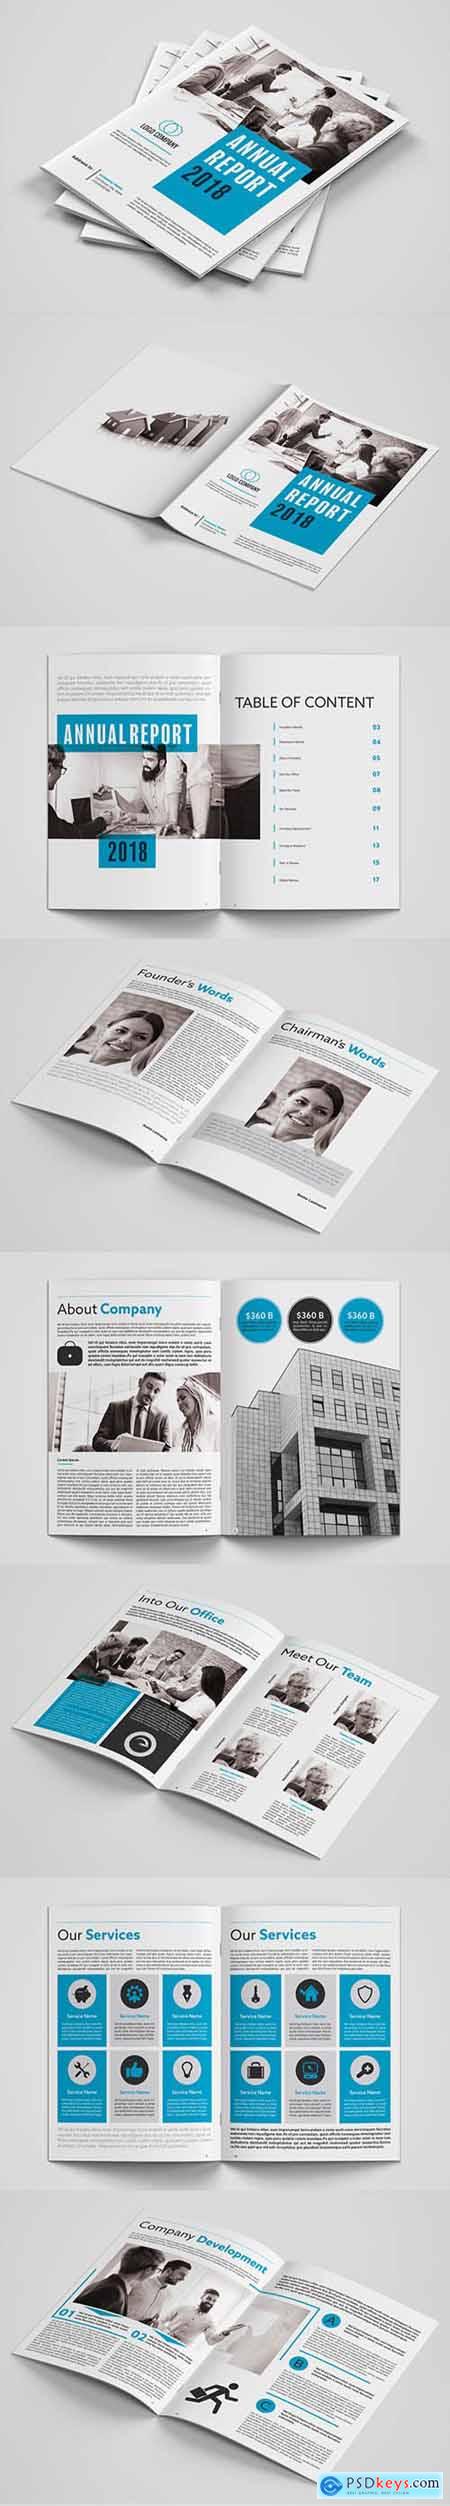 Annual Report Layout with Blue Accents 207333902